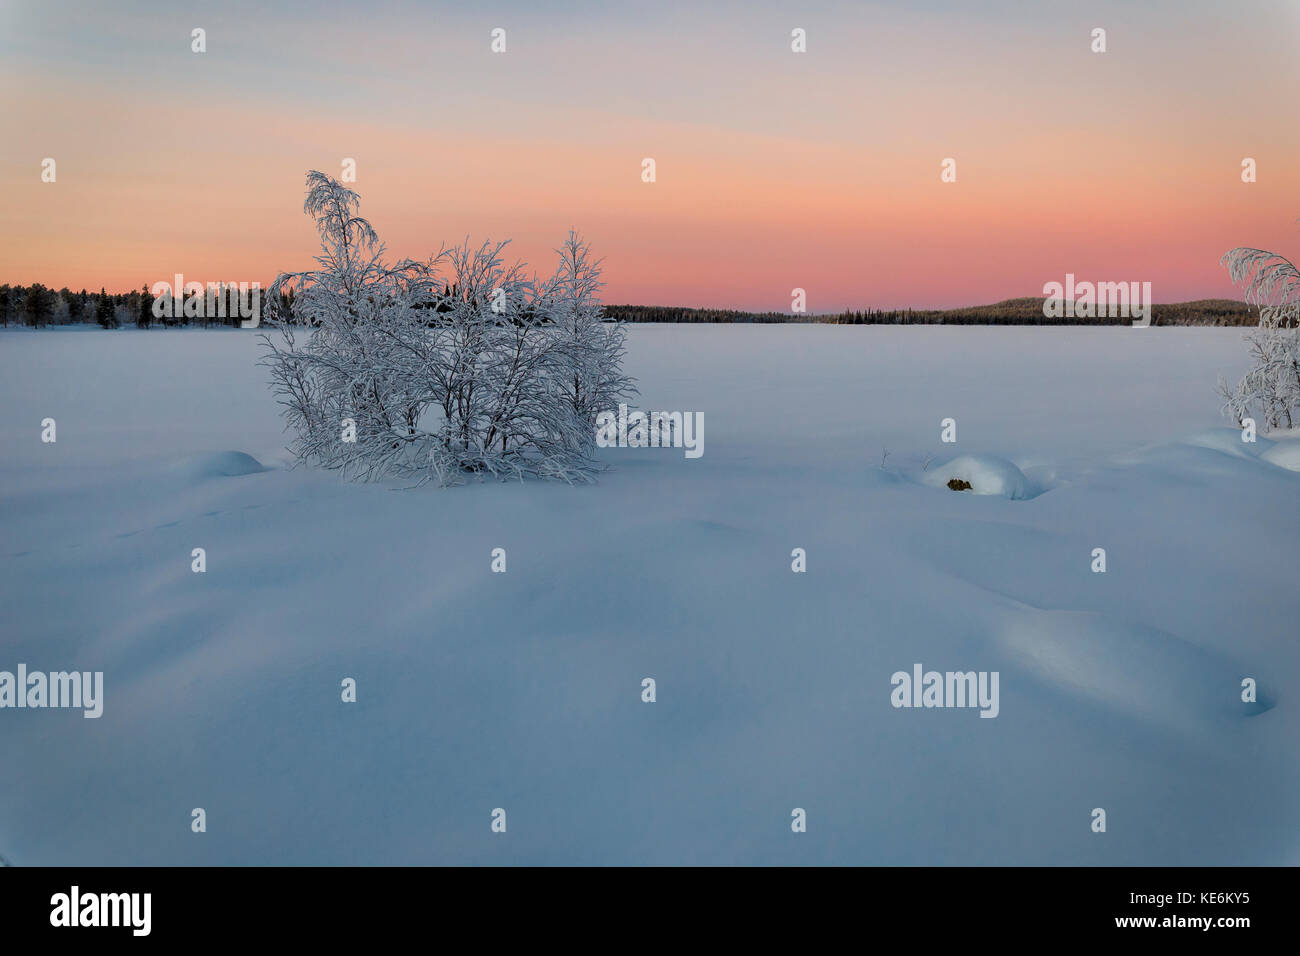 Bush on the frozen lake at sunset in Finland Stock Photo